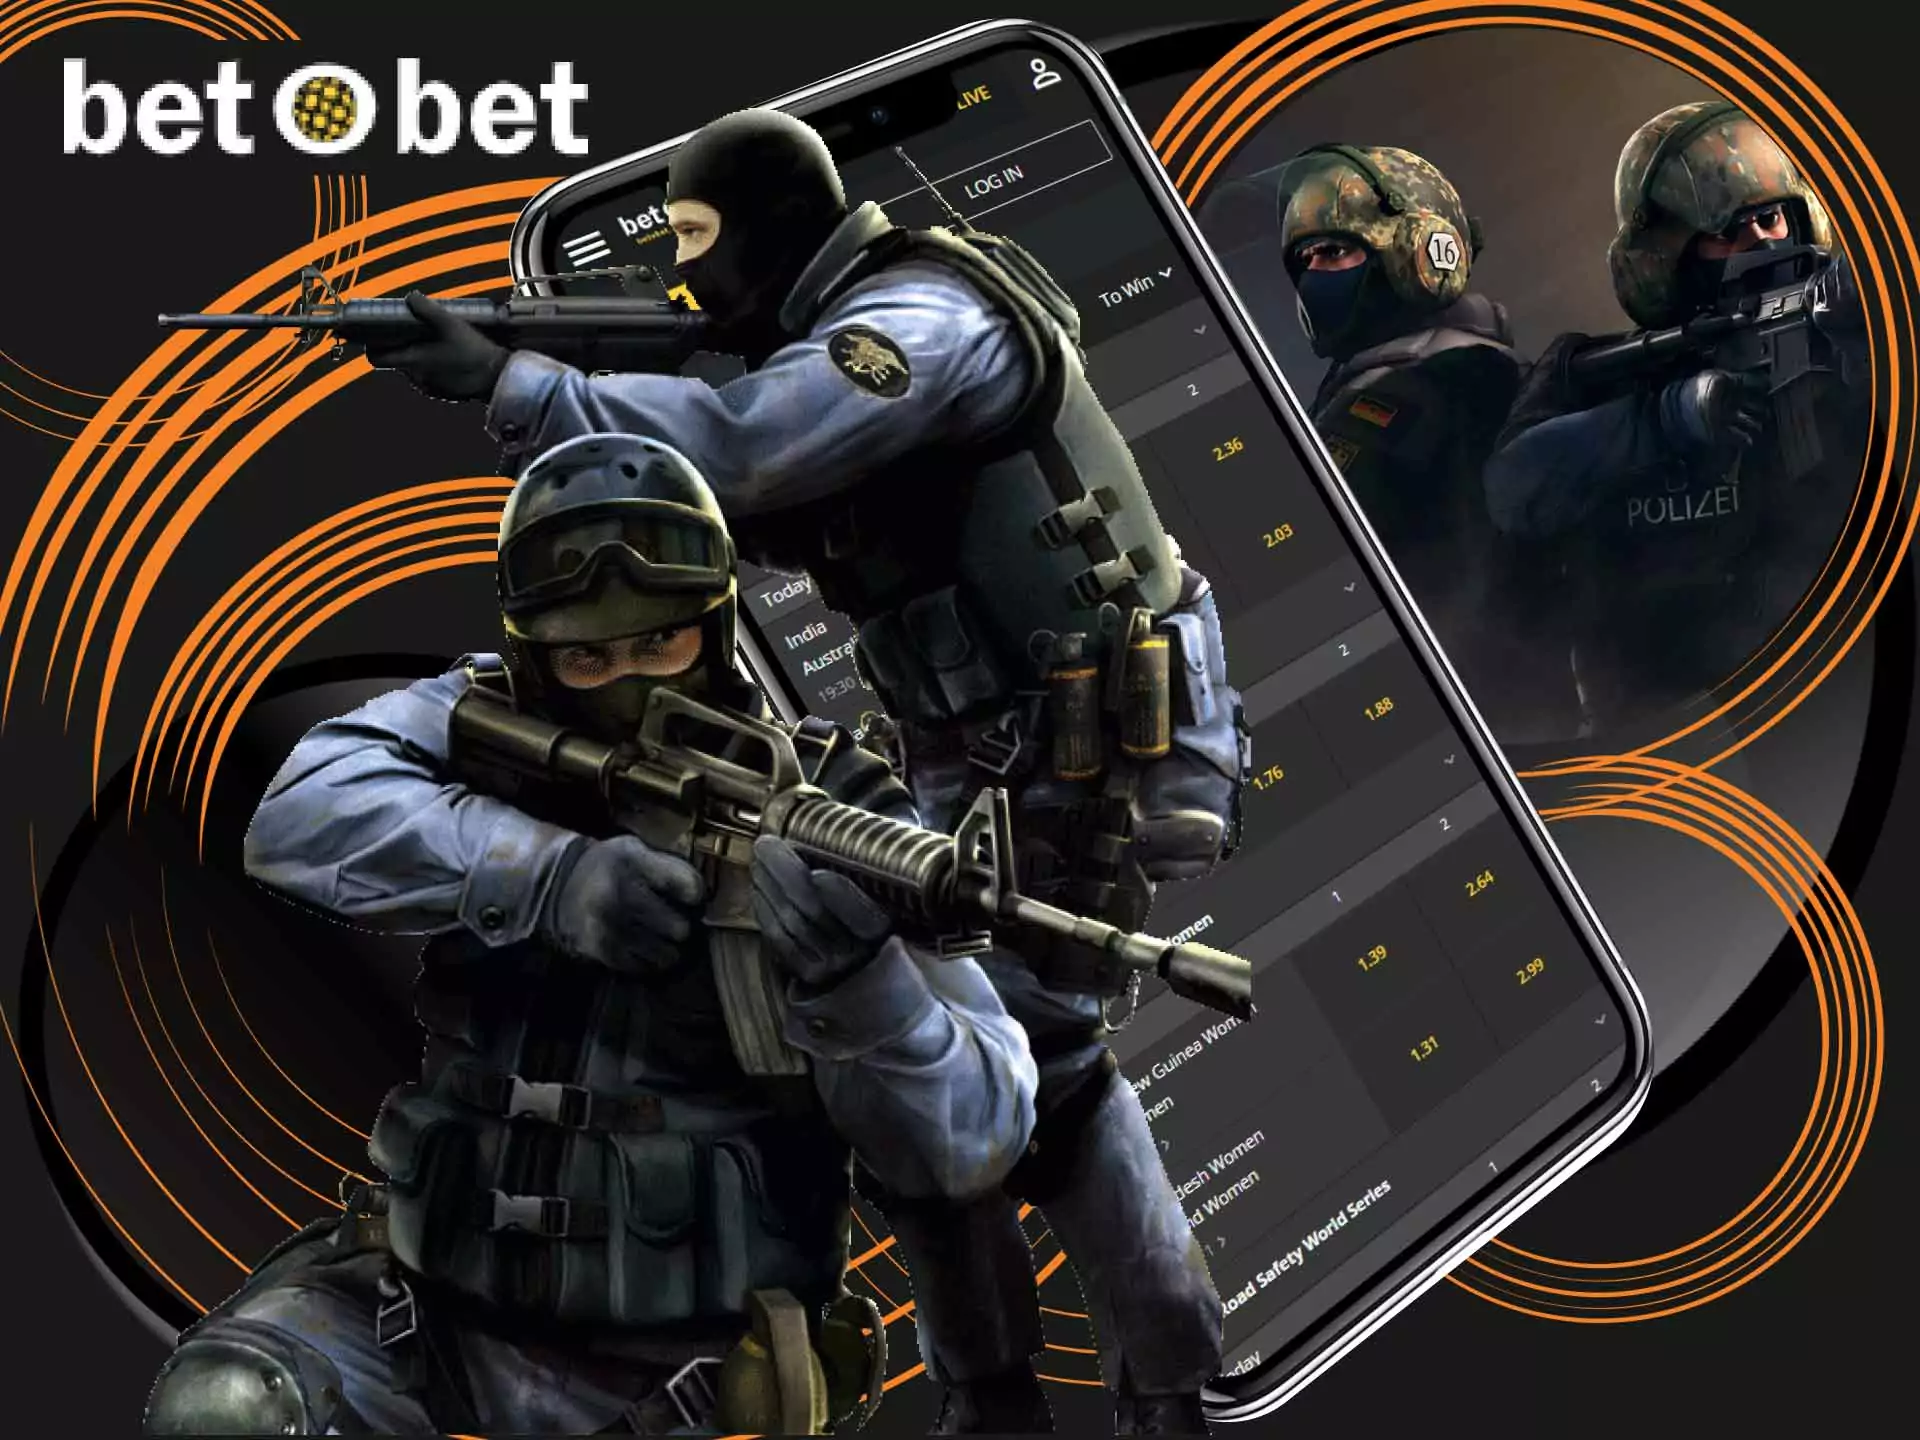 CS:GO is also available for betting at BetOBet.